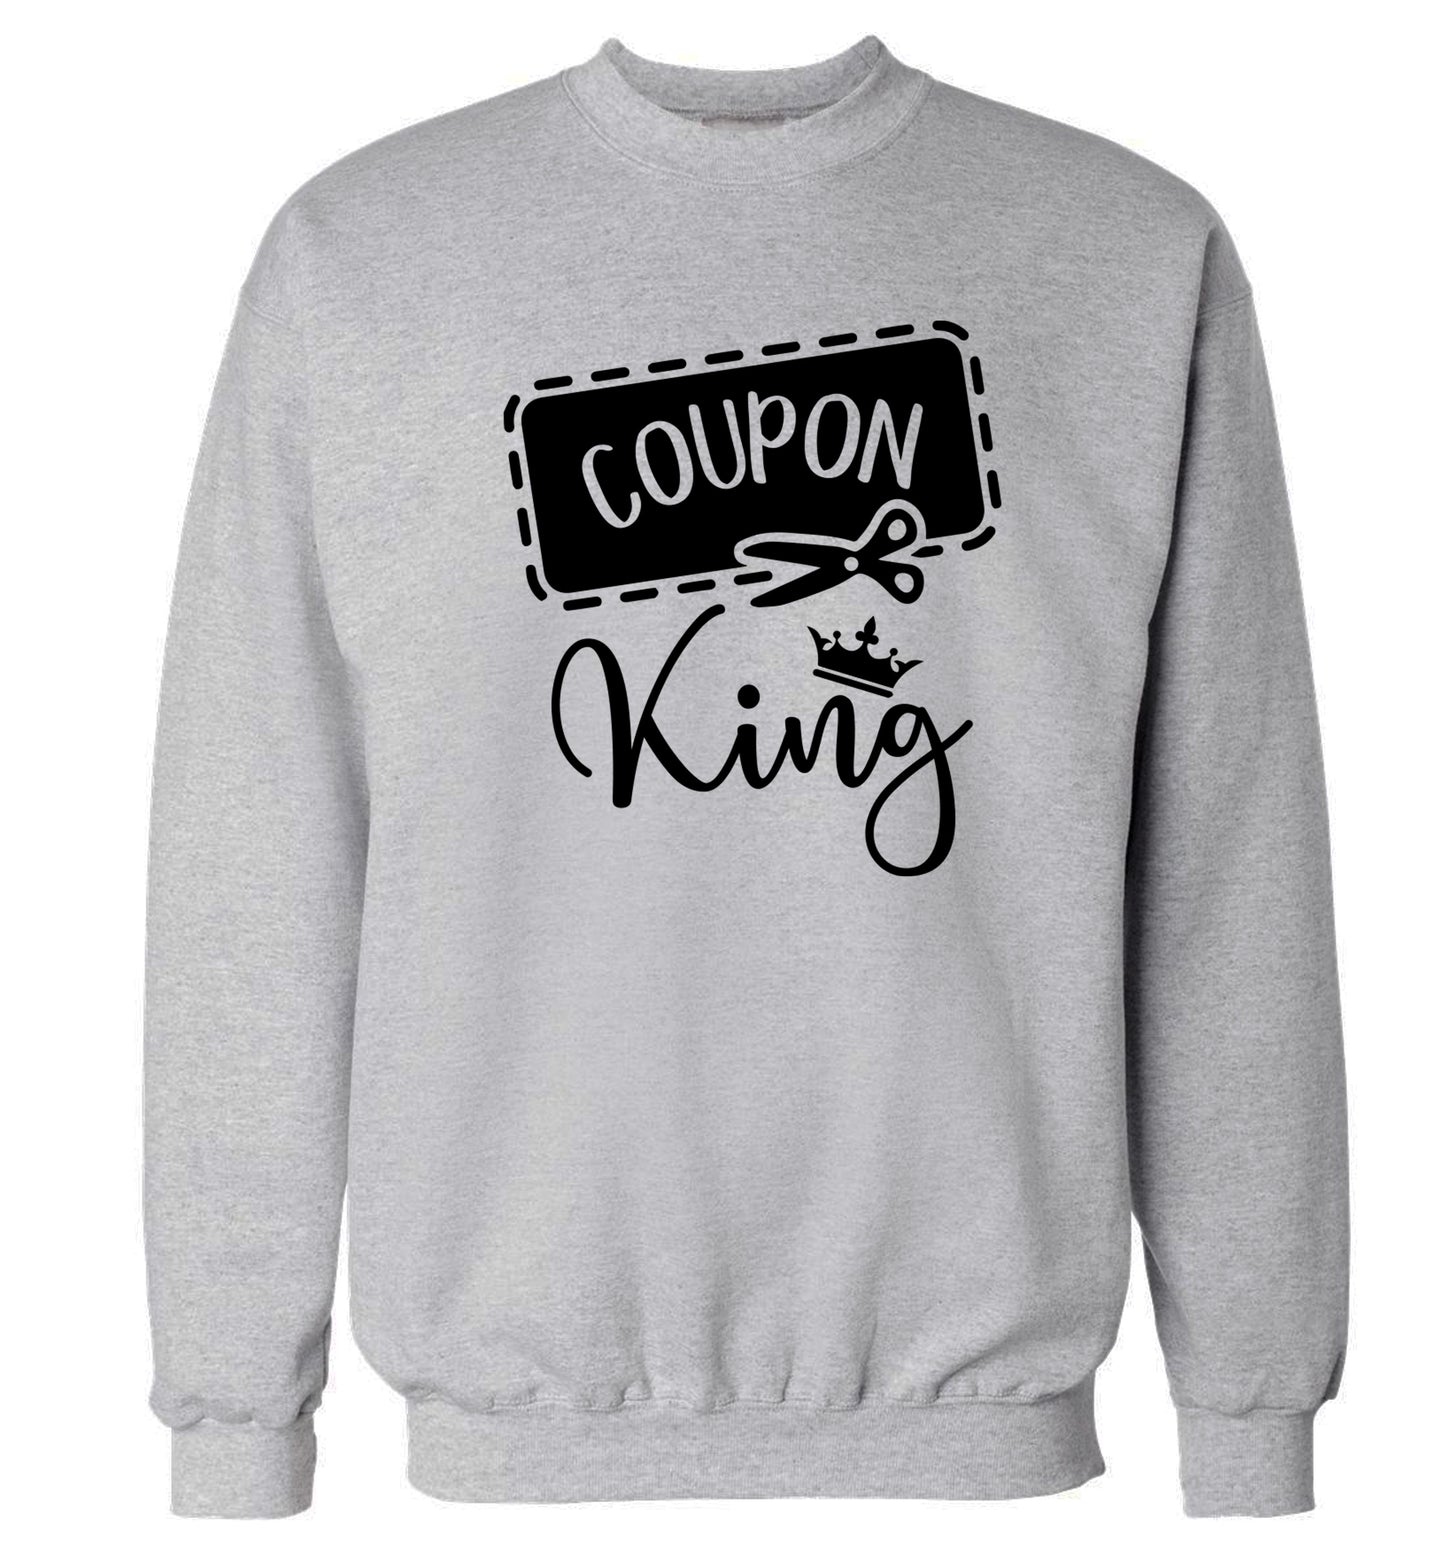 Coupon King Adult's unisex grey Sweater 2XL